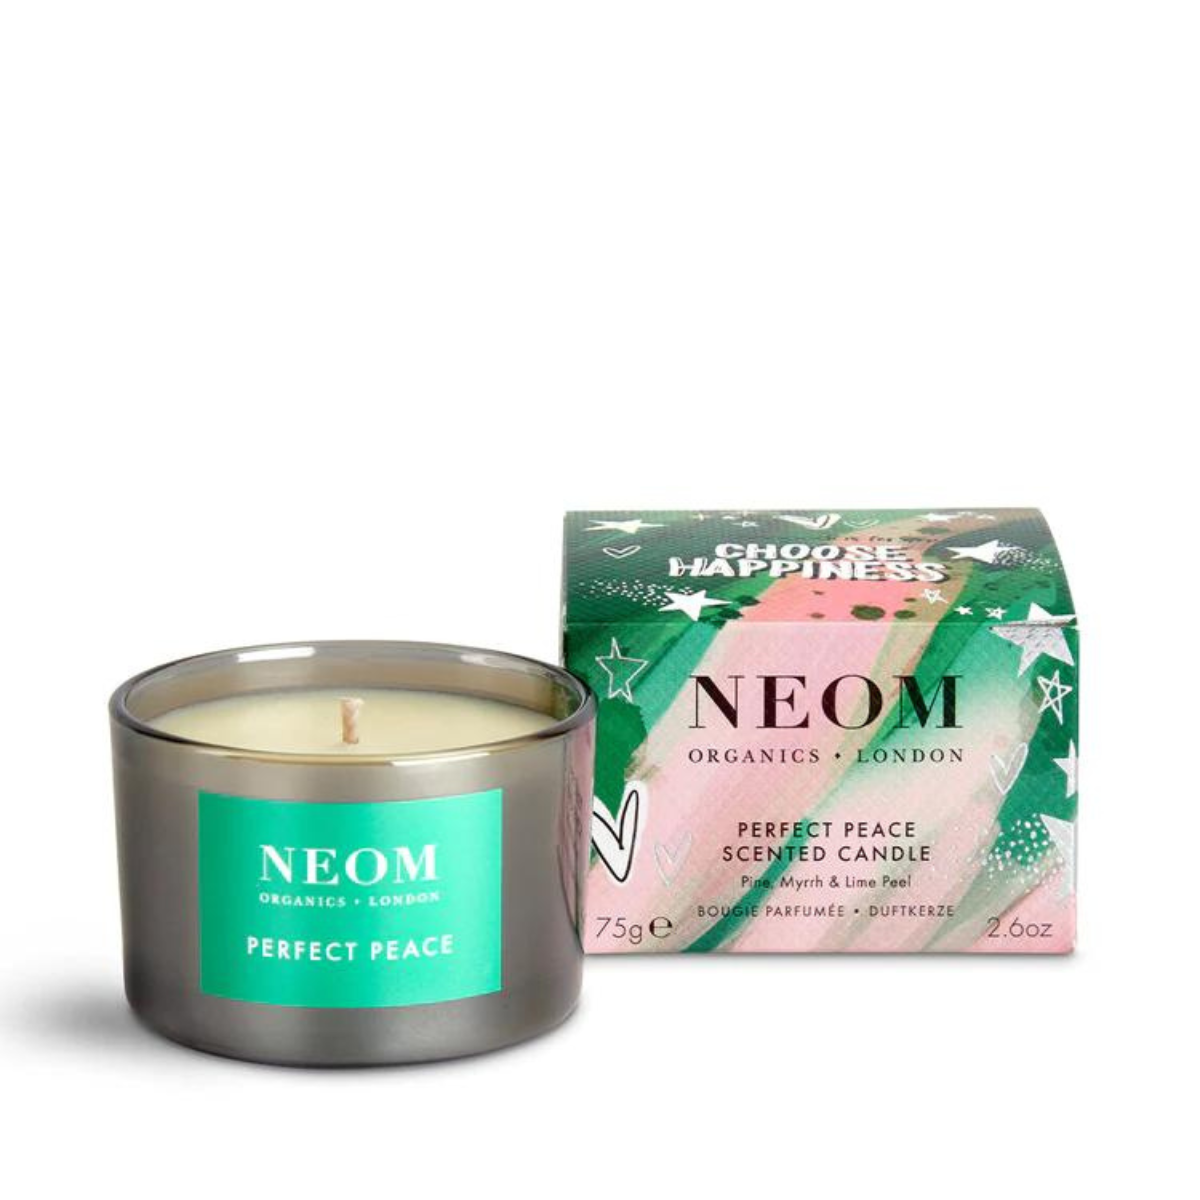 Neom Perfect Peace Travel Candle.